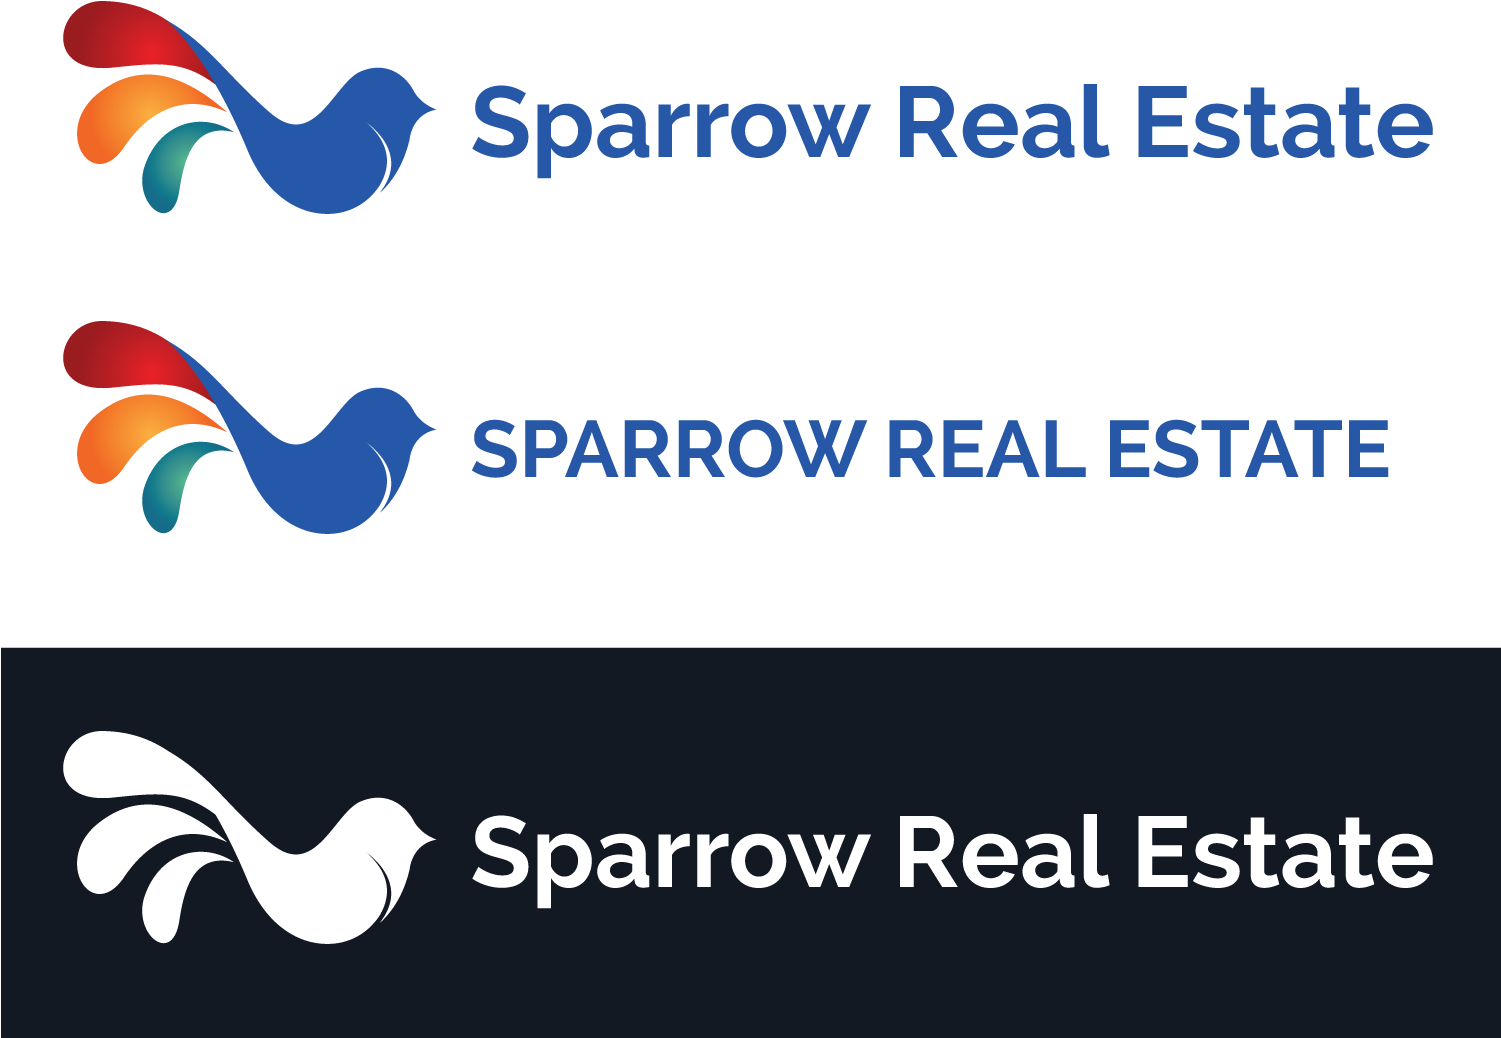 Logo Design By James For Sparrow Real Estate - Graphic Design (1500x1200)